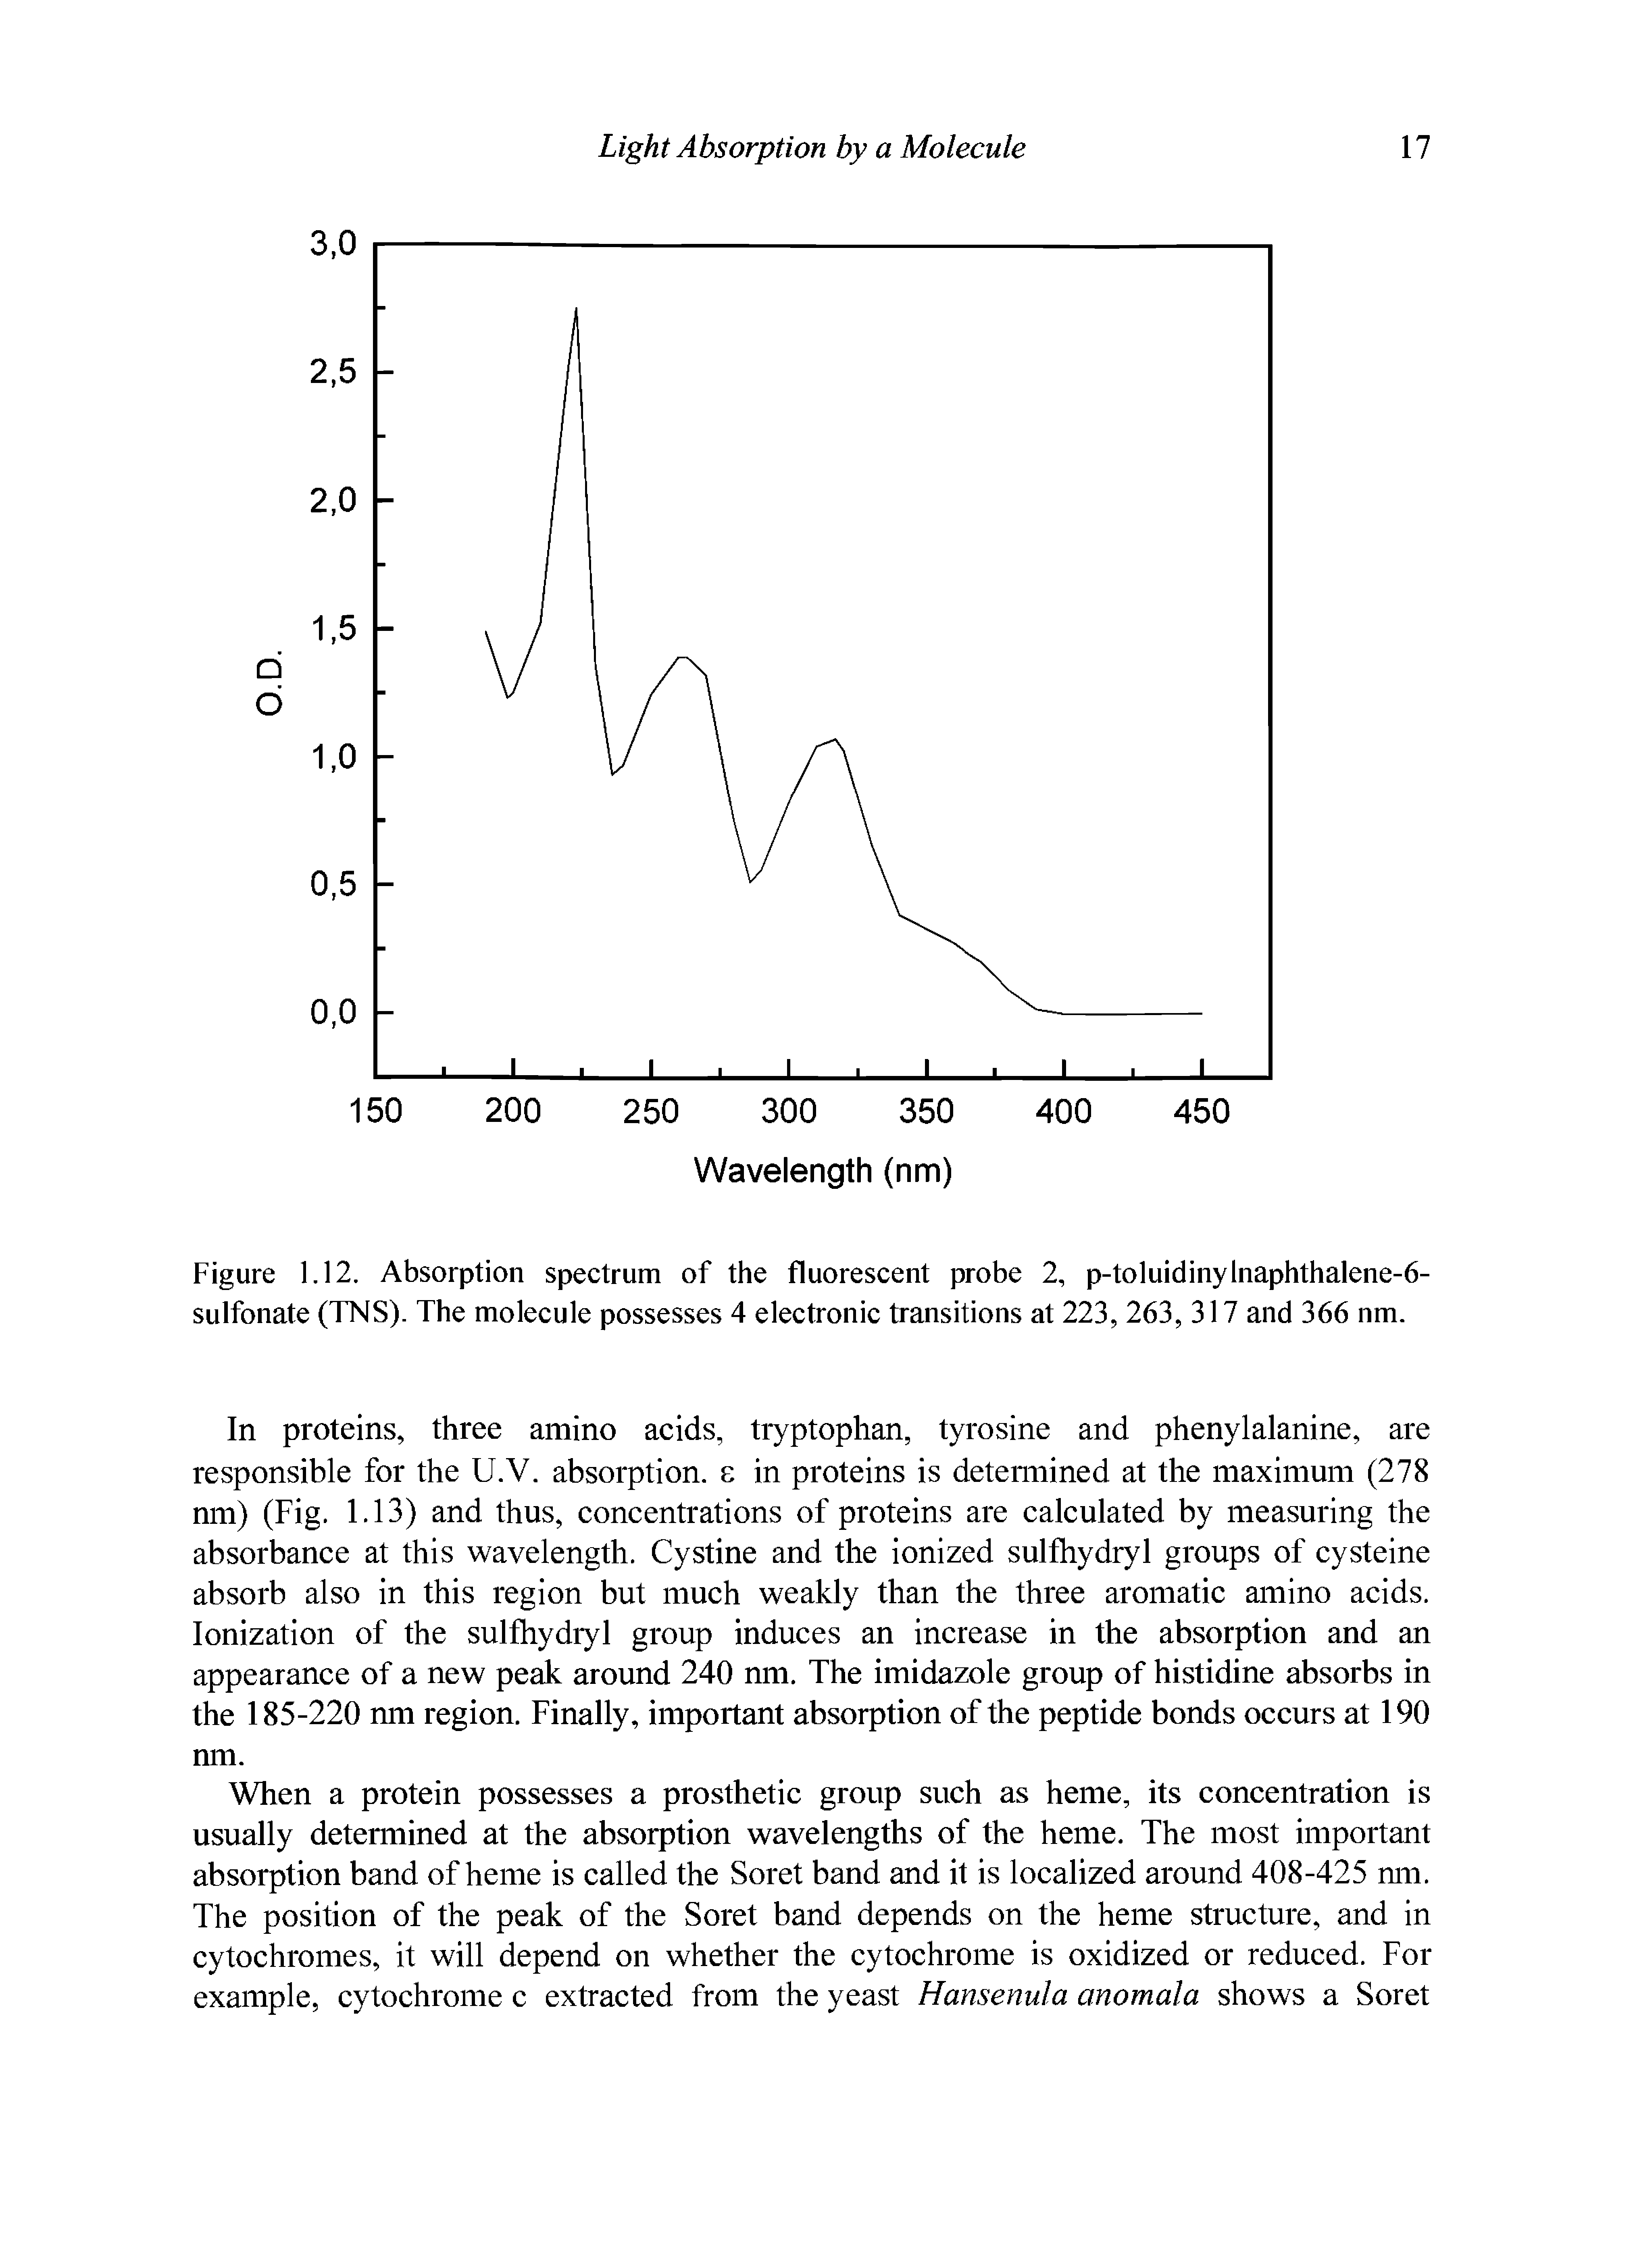 Figure 1.12. Absorption spectrum of the fluorescent probe 2, p-toluidinylnaphthalene-6-sulfonate (TNS). The molecule possesses 4 electronic transitions at 223, 263, 317 and 366 nm.